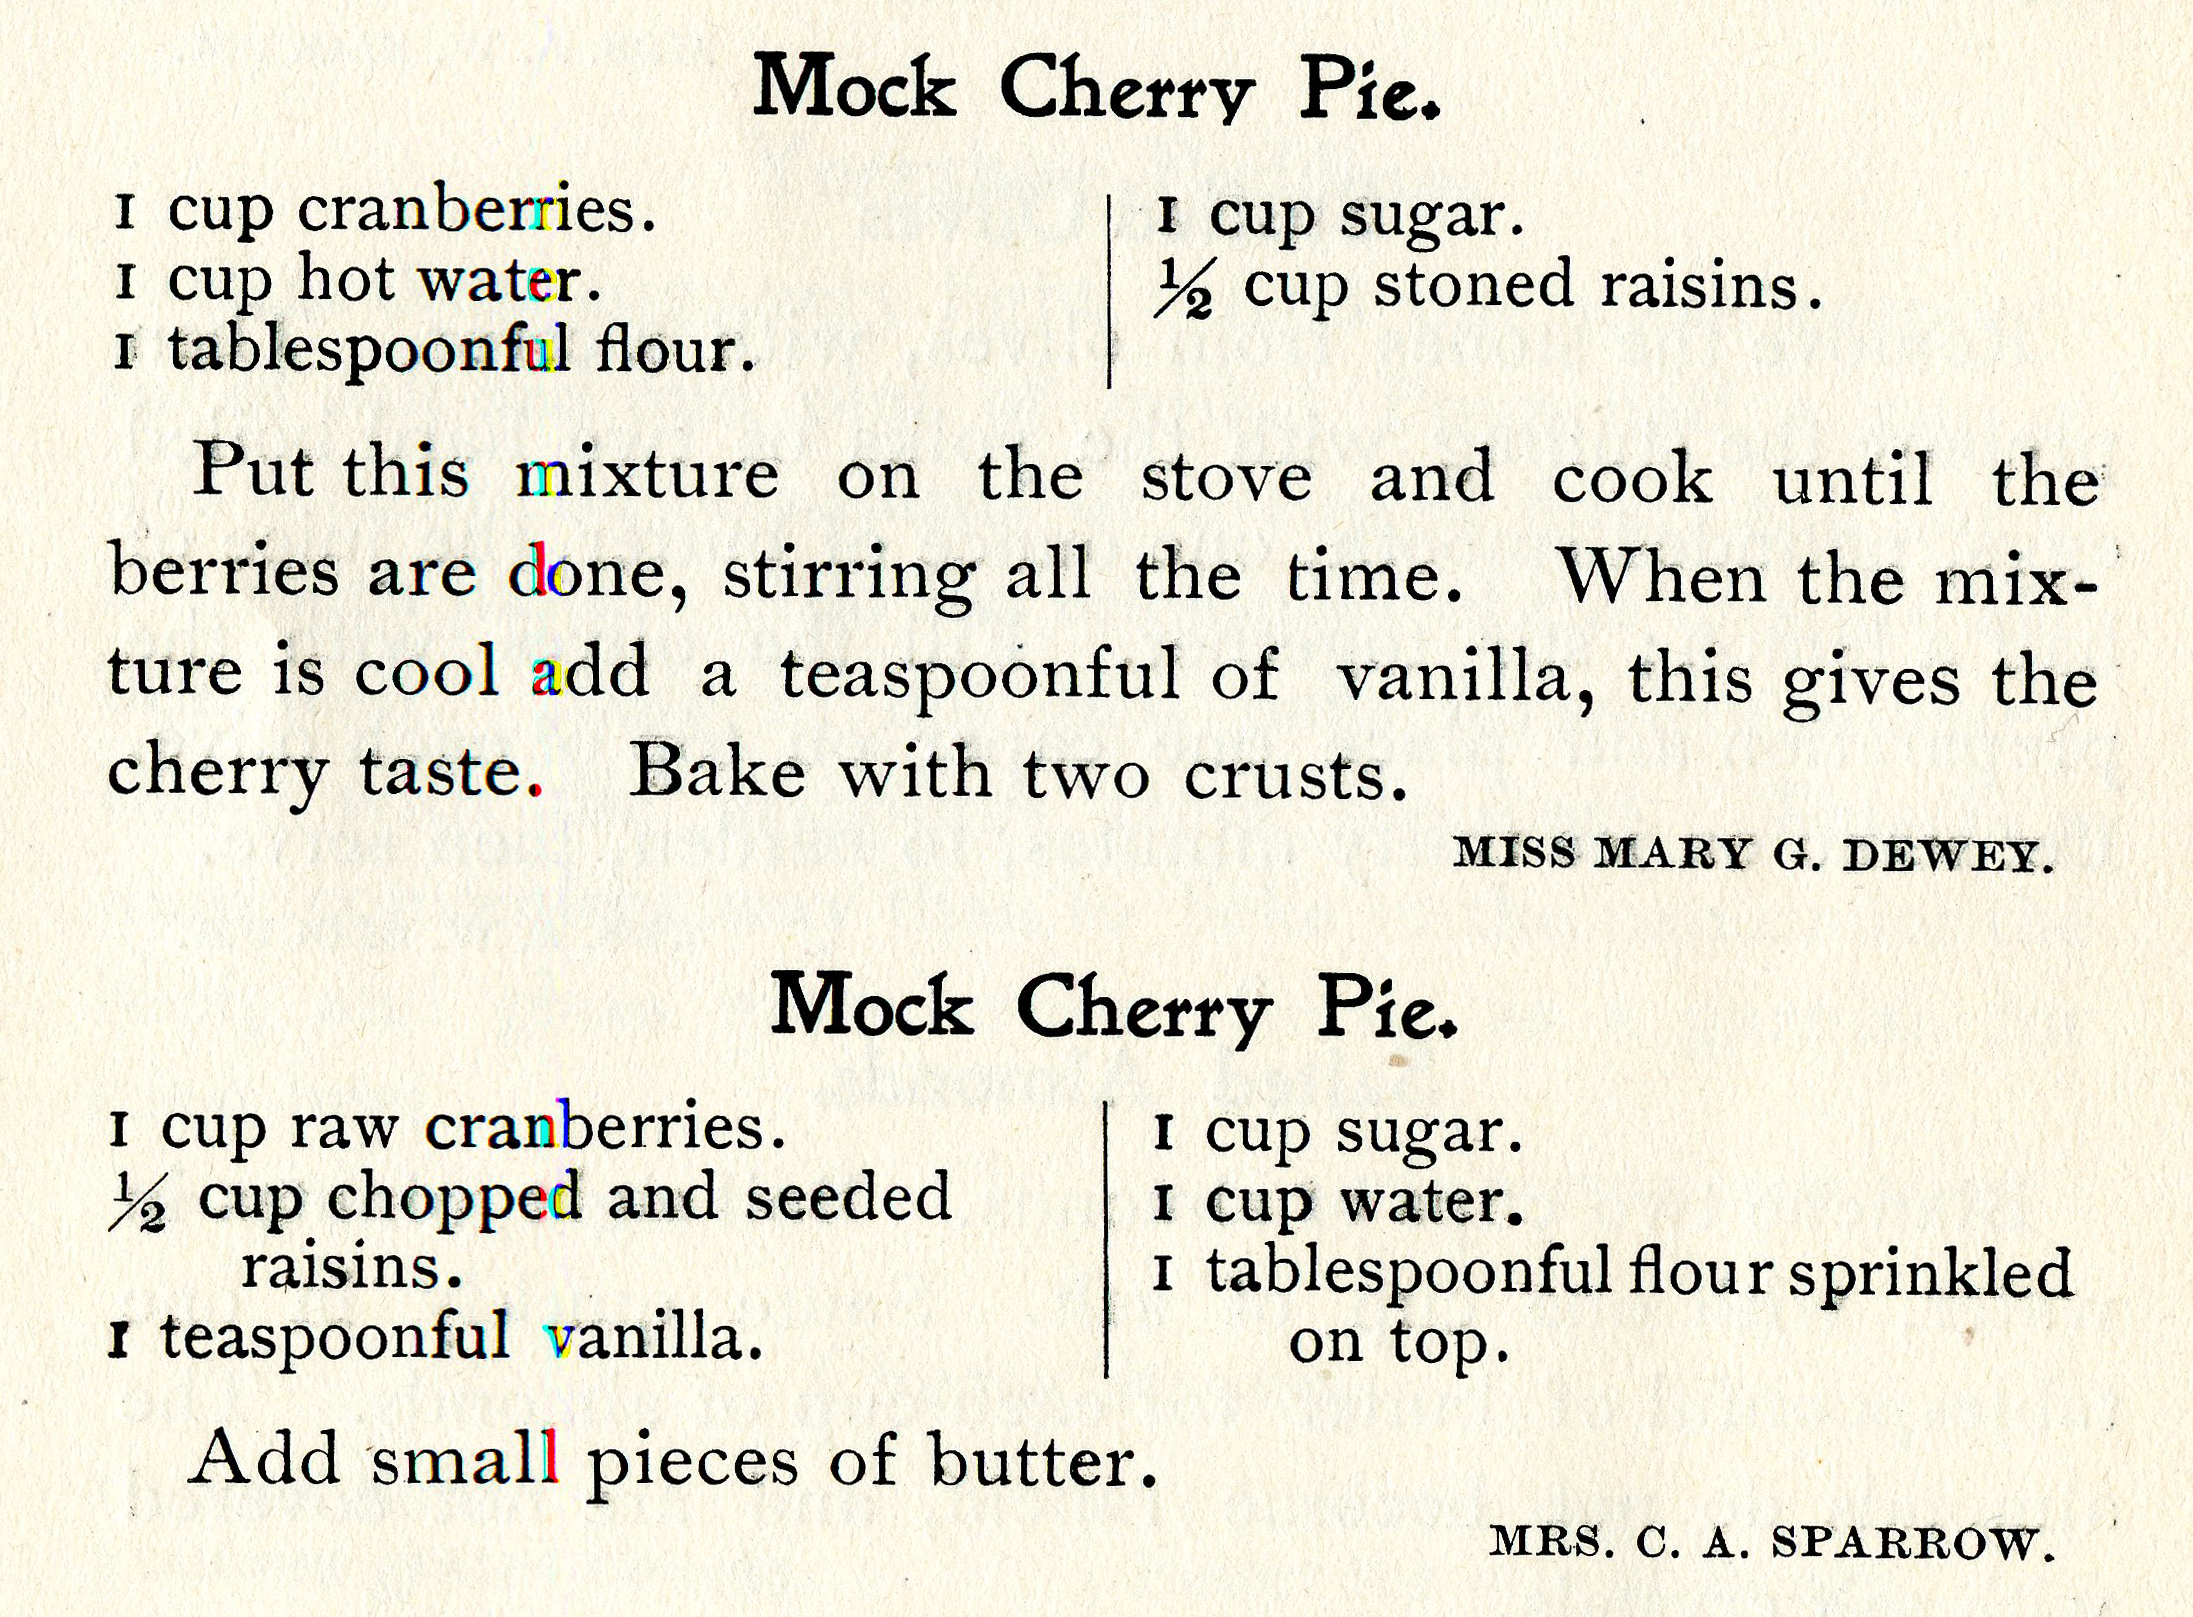 Two recipes for mock cherry pie